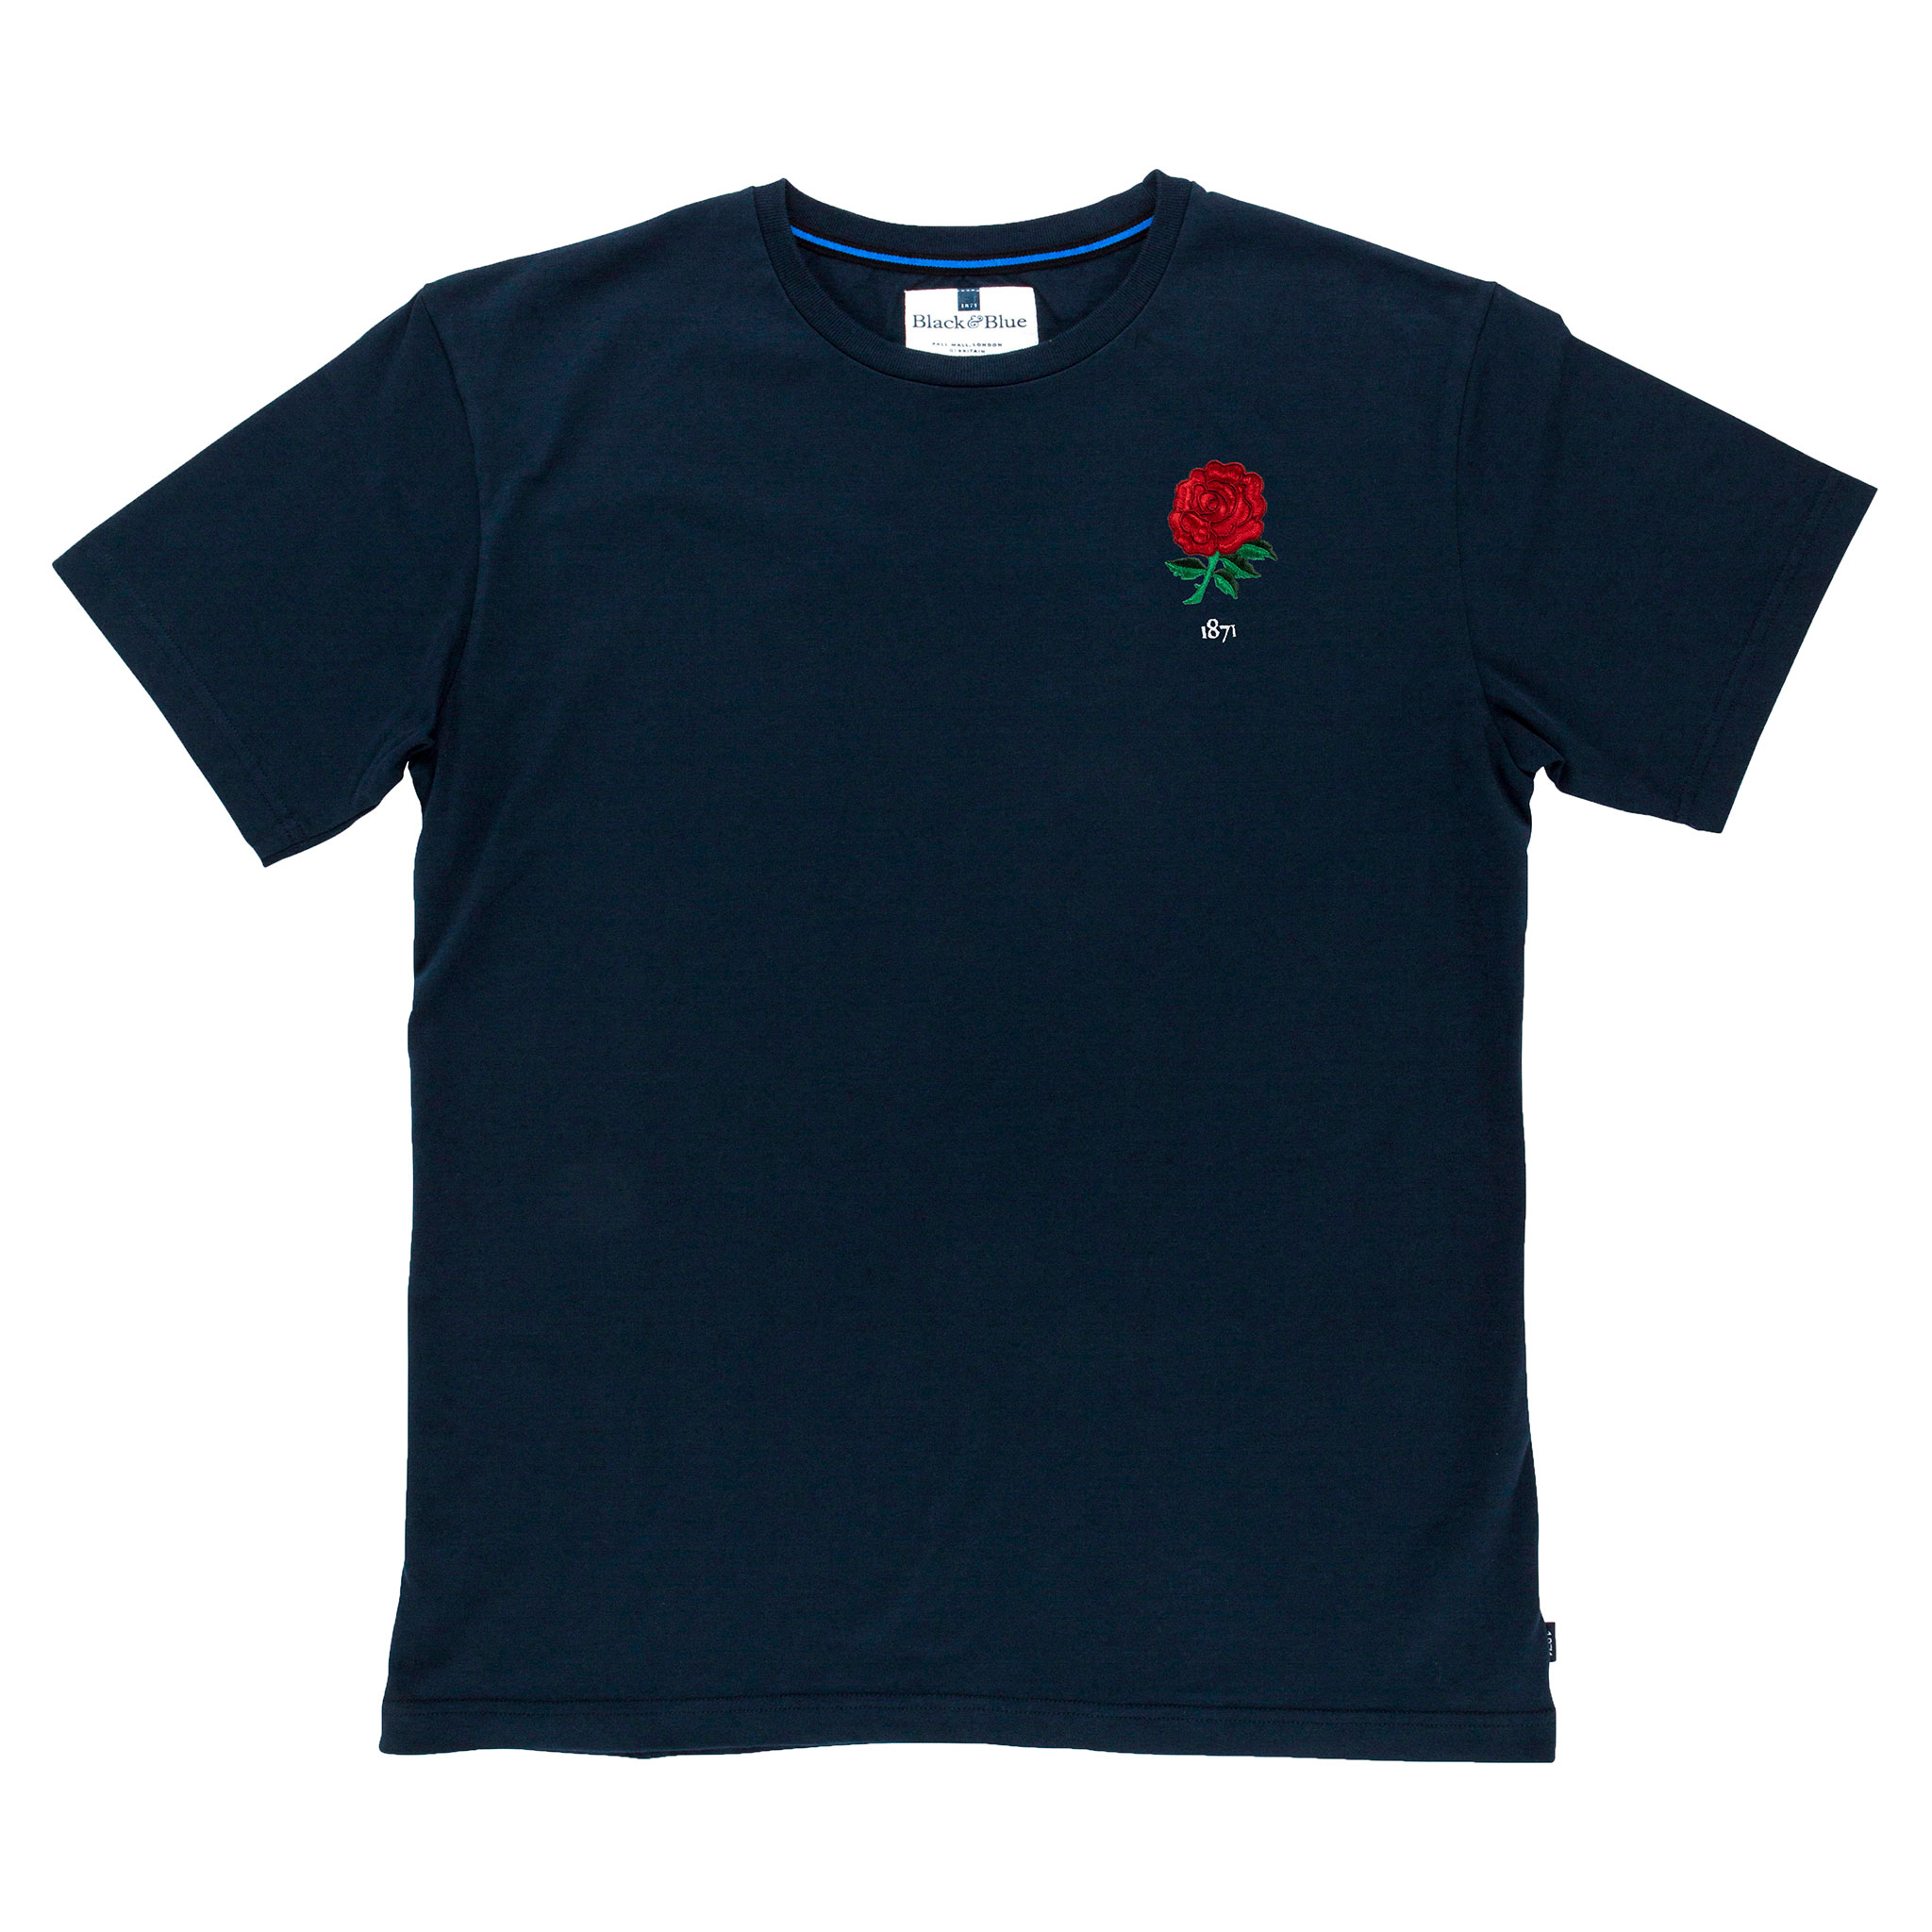 England 1871 Navy T-Shirt_Front